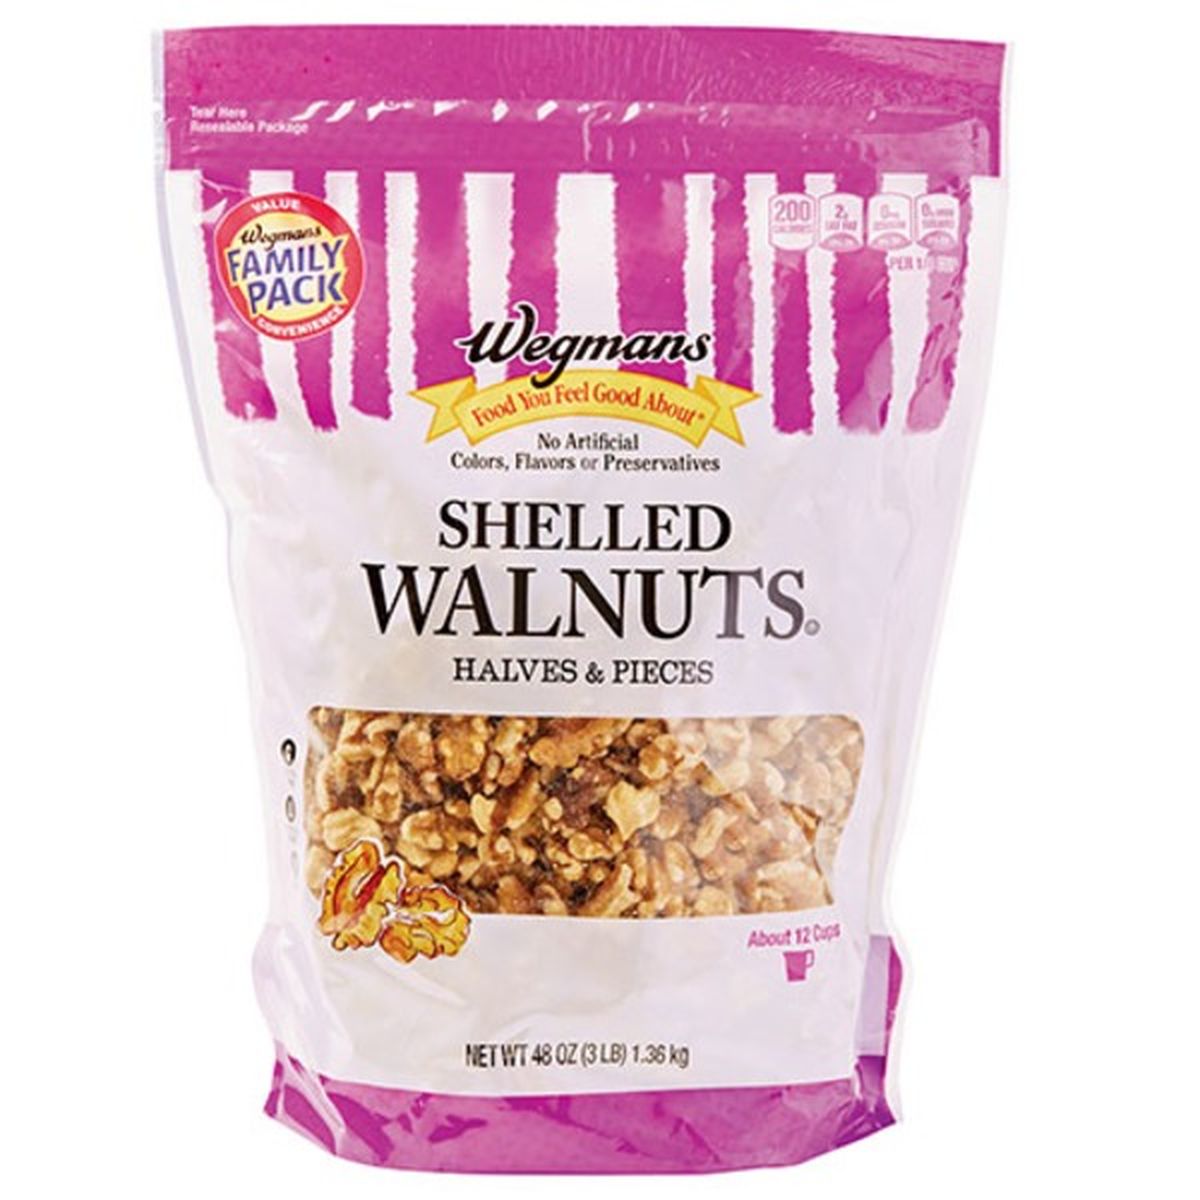 Calories in Wegmans Shelled Walnuts Halves & Pieces, FAMILY PACK